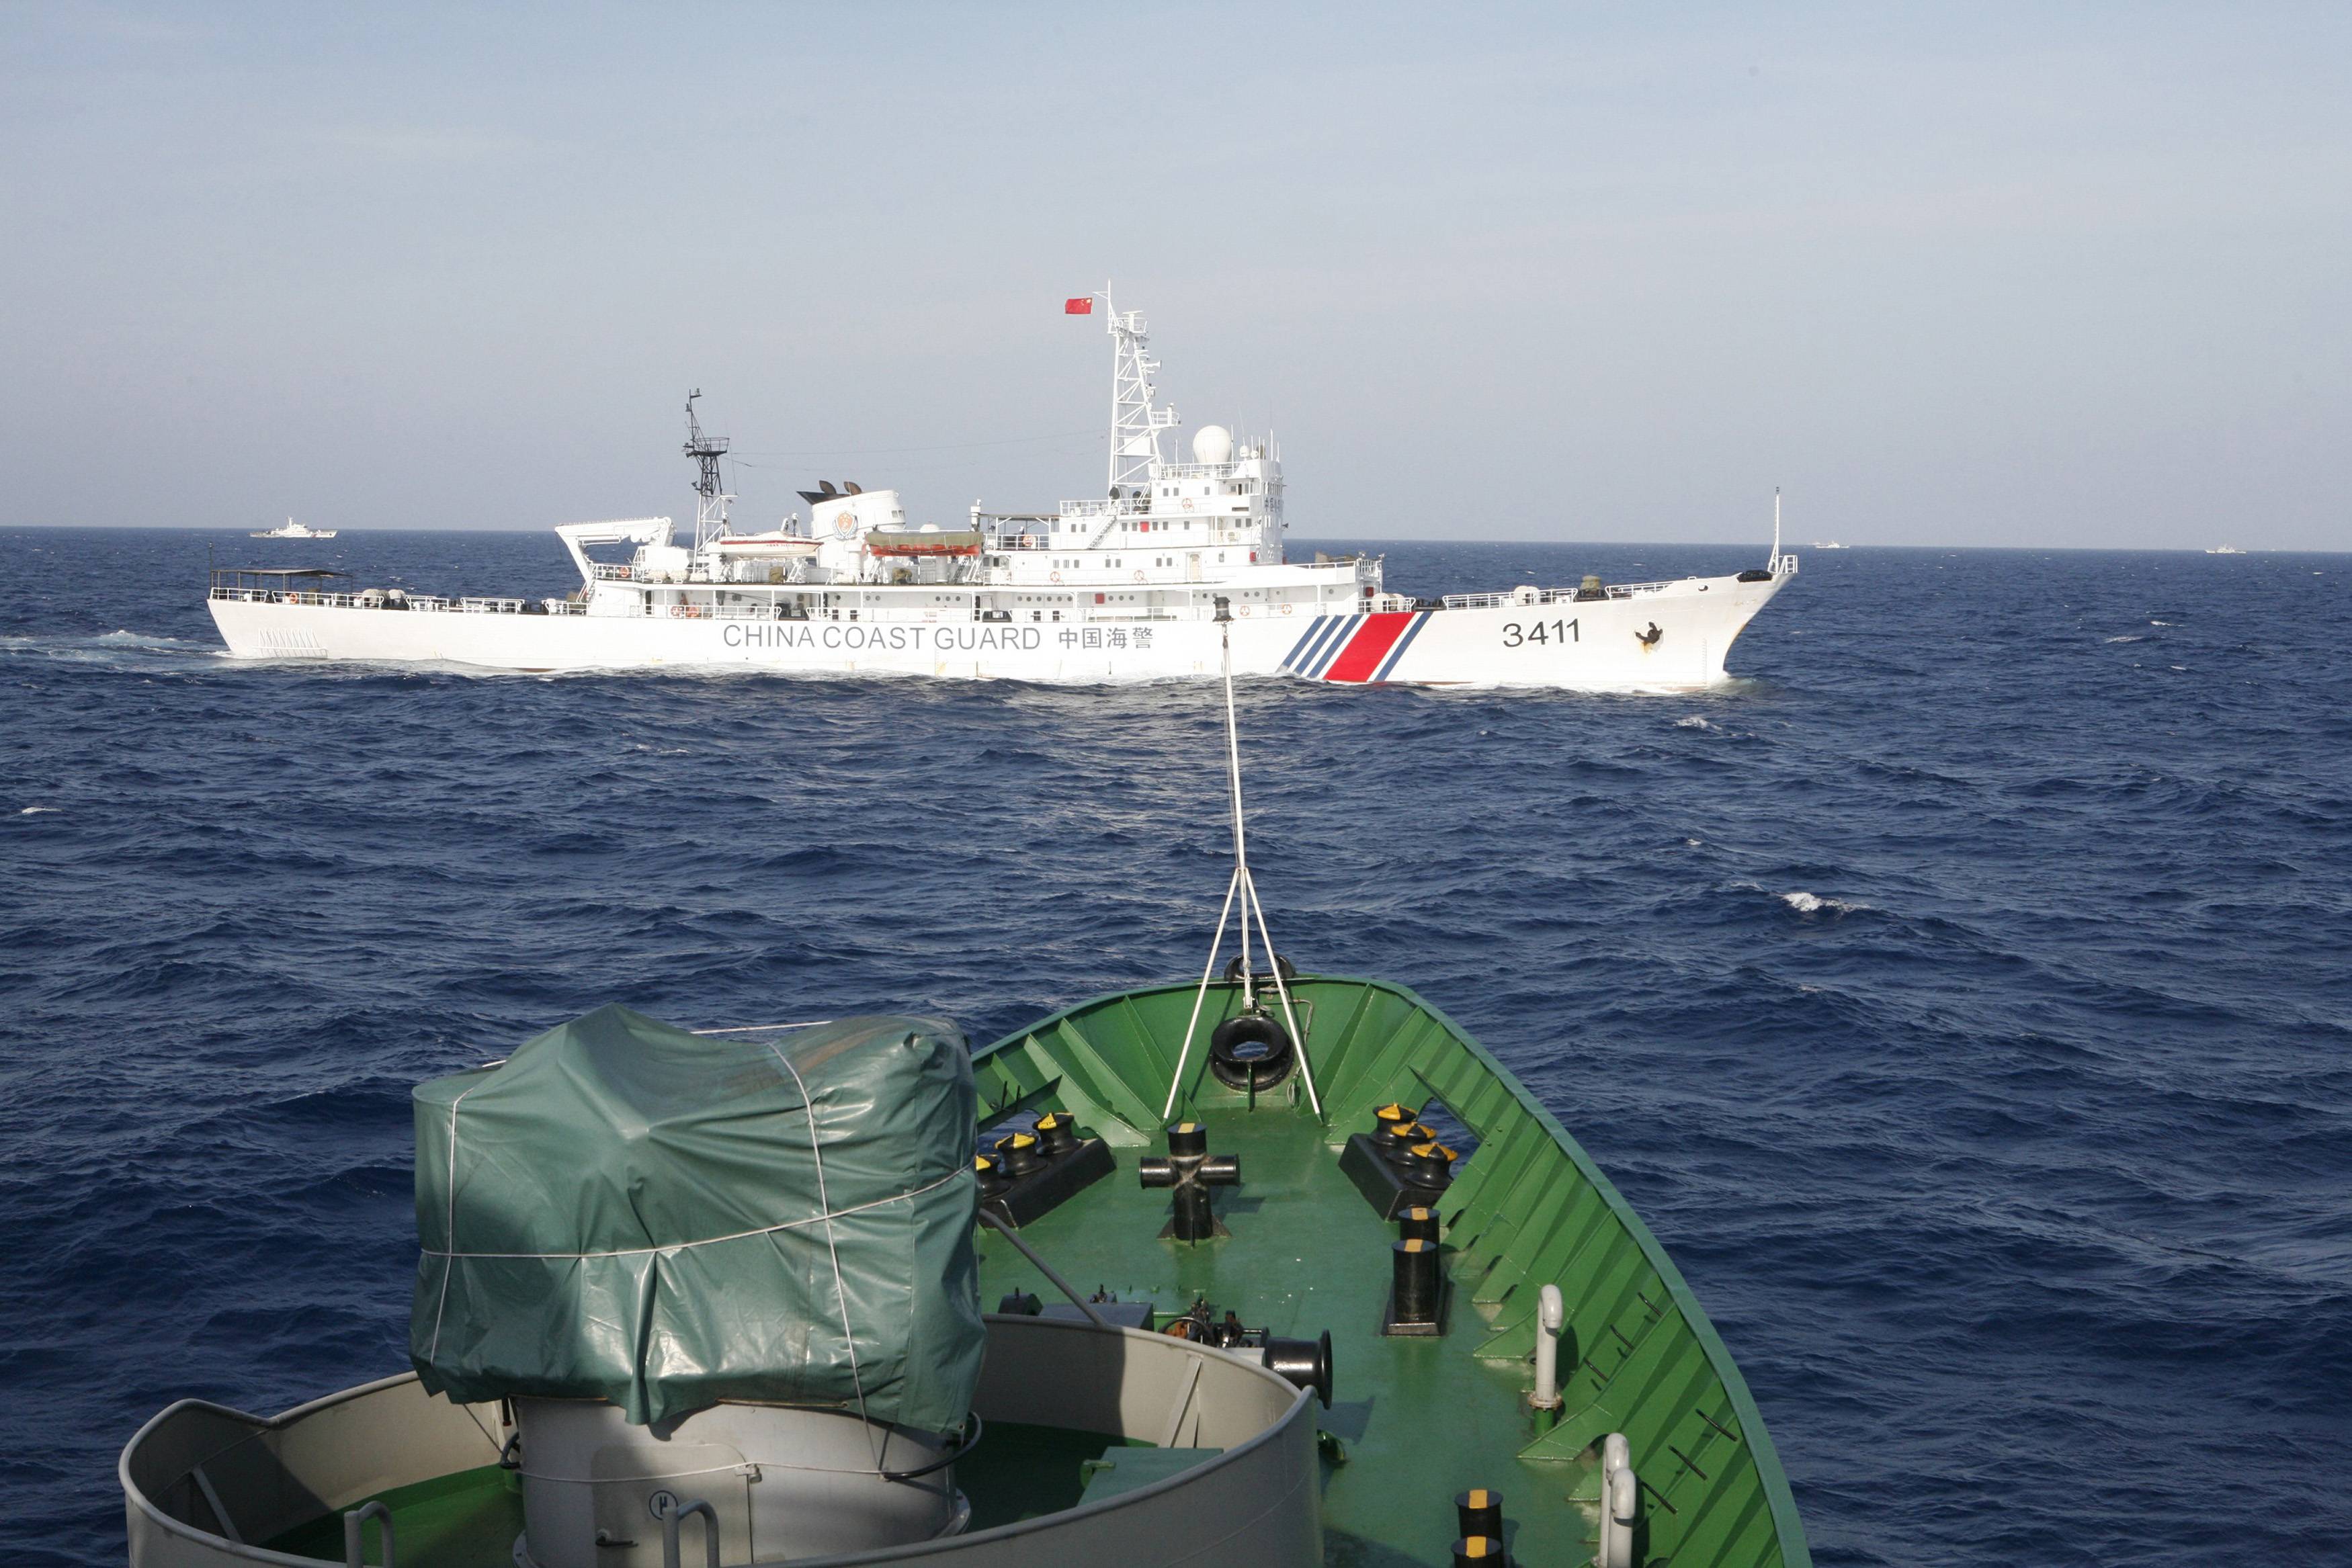 A ship (top) of Chinese Coast Guard is seen near a ship of Vietnam Marine Guard in the South China Sea, about 210 km off shore of Vietnam May 14, 2014. Photo: Reuters